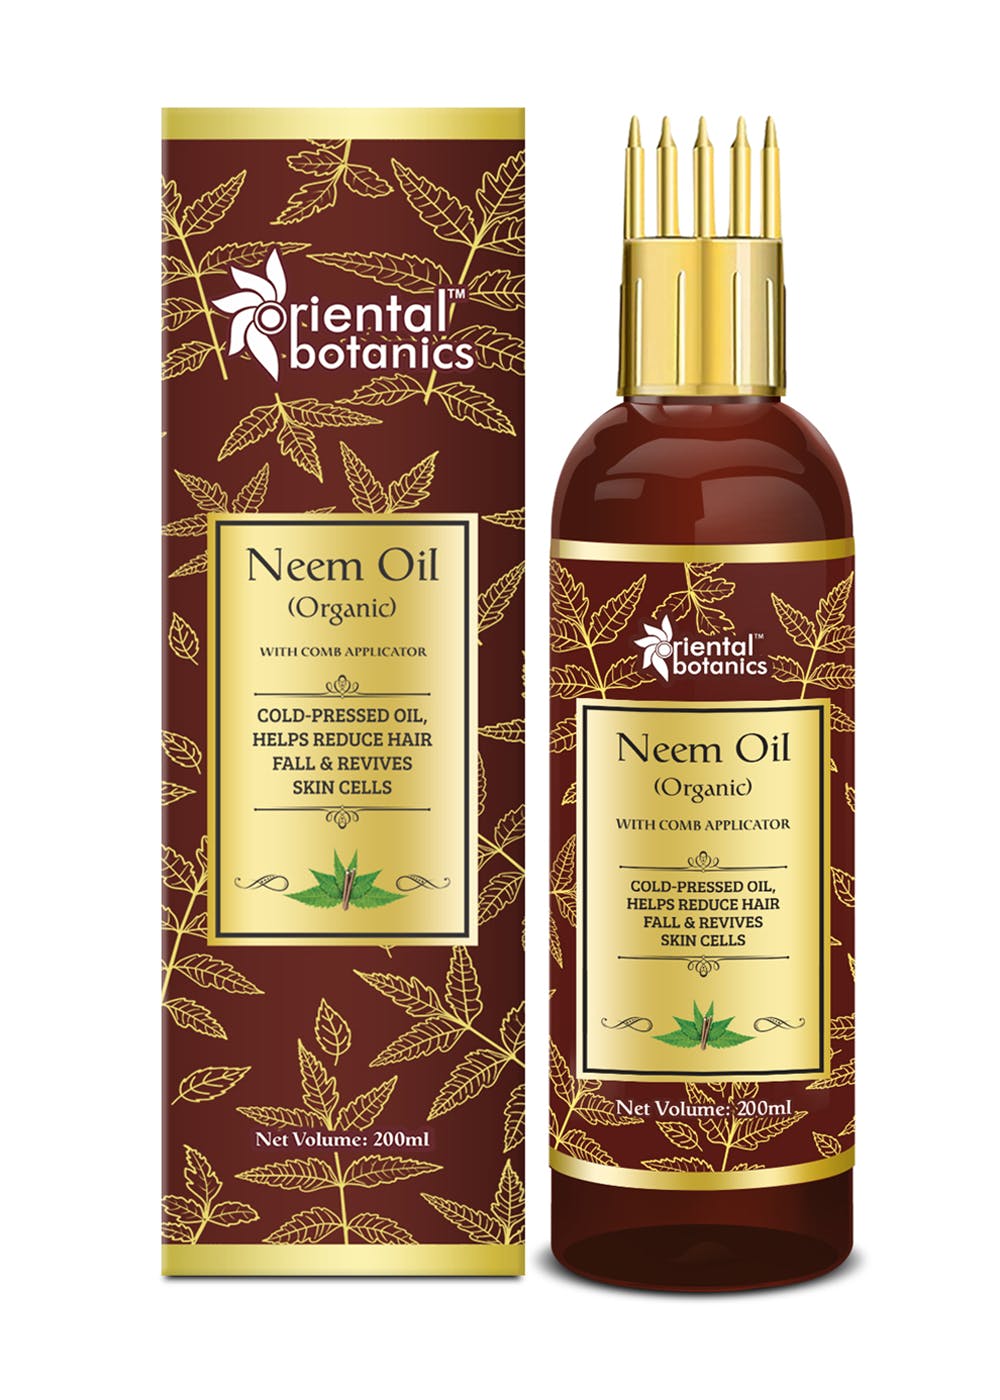 Get Organic Neem Oil for Hair and Skin Care - 200ml at ₹ 399 | LBB Shop